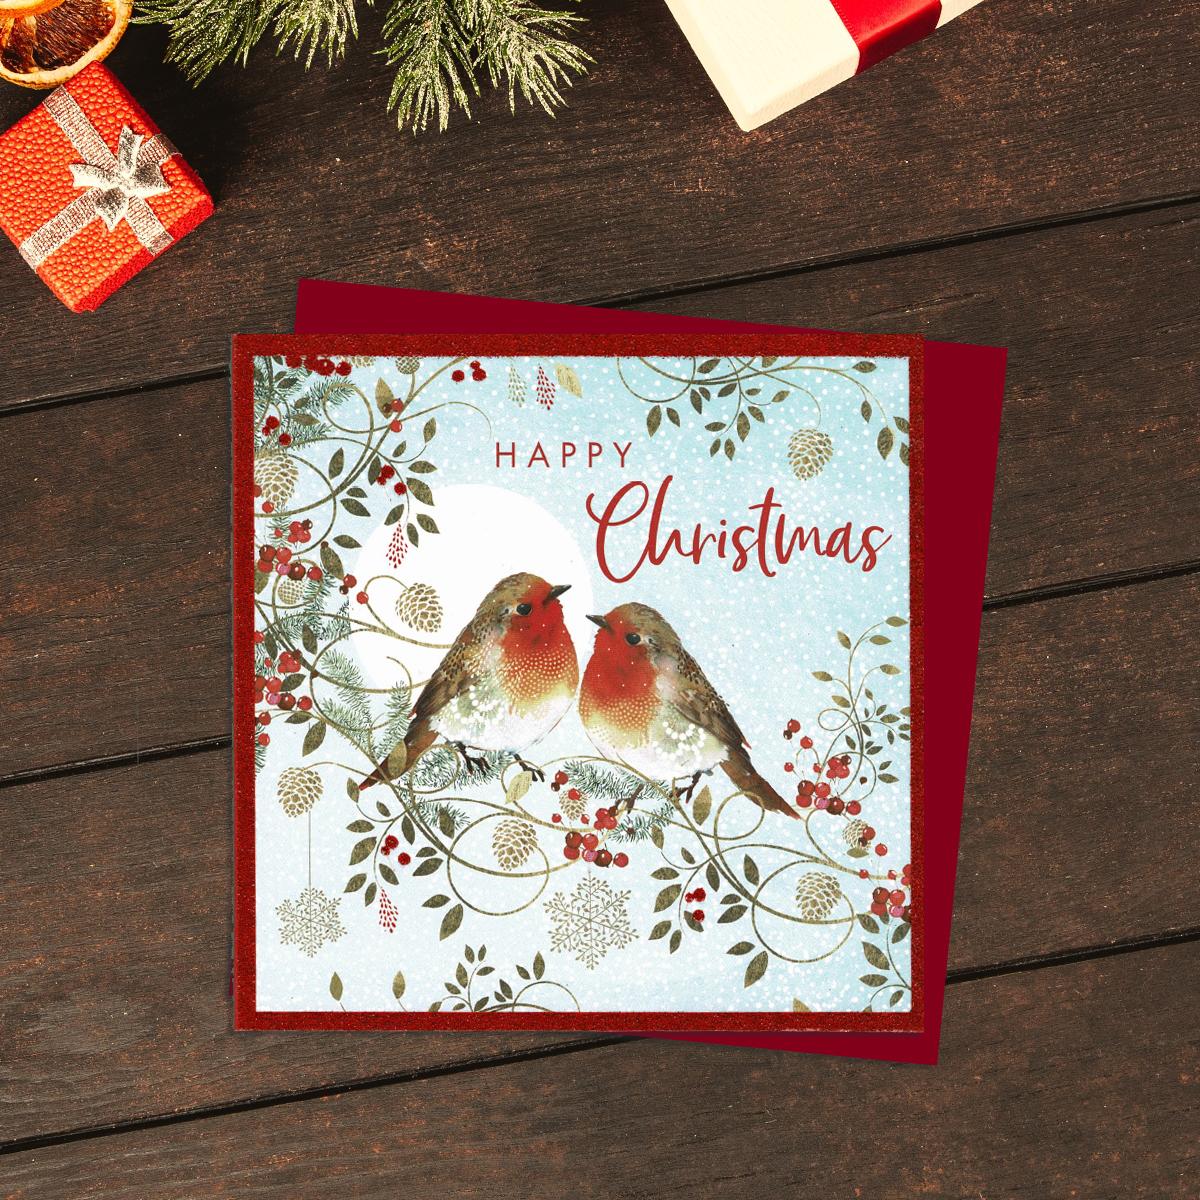 Happy Christmas Open Christmas Card Showing two Robins On A Branch Of Berries. Finished With Red Glitter. Complete With Red Envelope